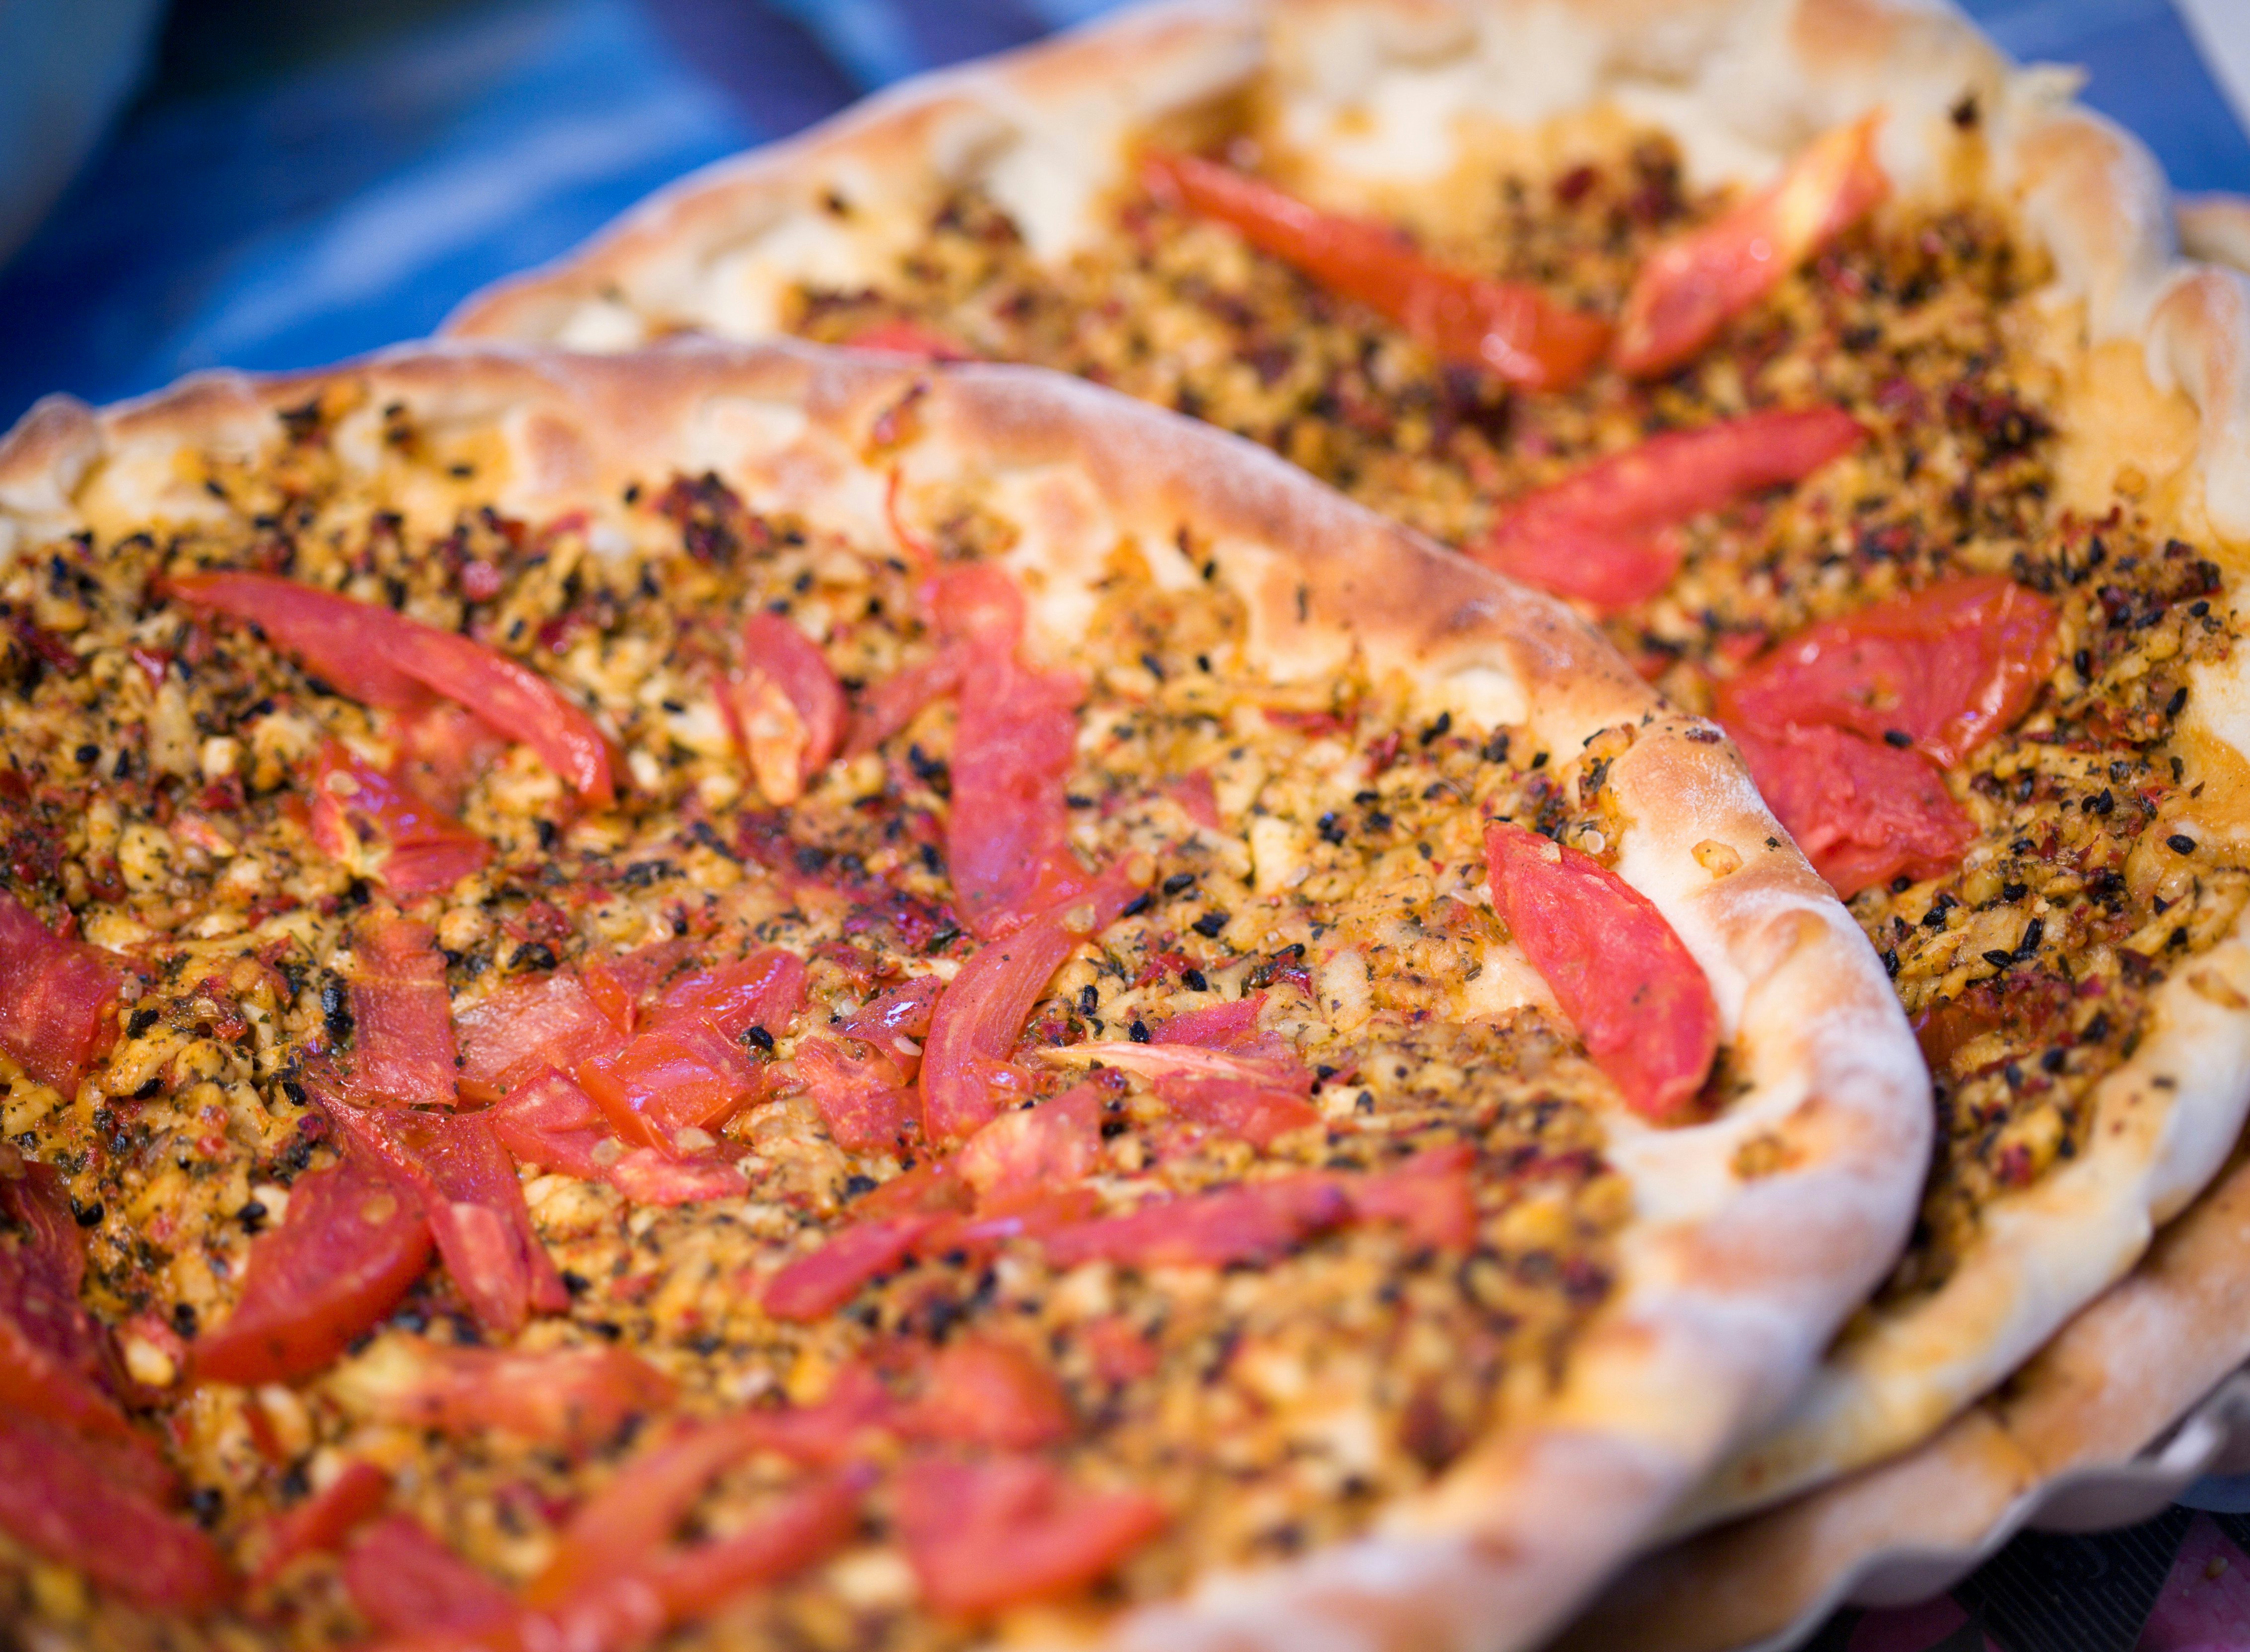 A close-up shot of two lahmacuns: dough that has been rolled into a circular base and baked, then topped with ingredients like chilli flakes and ground meat.